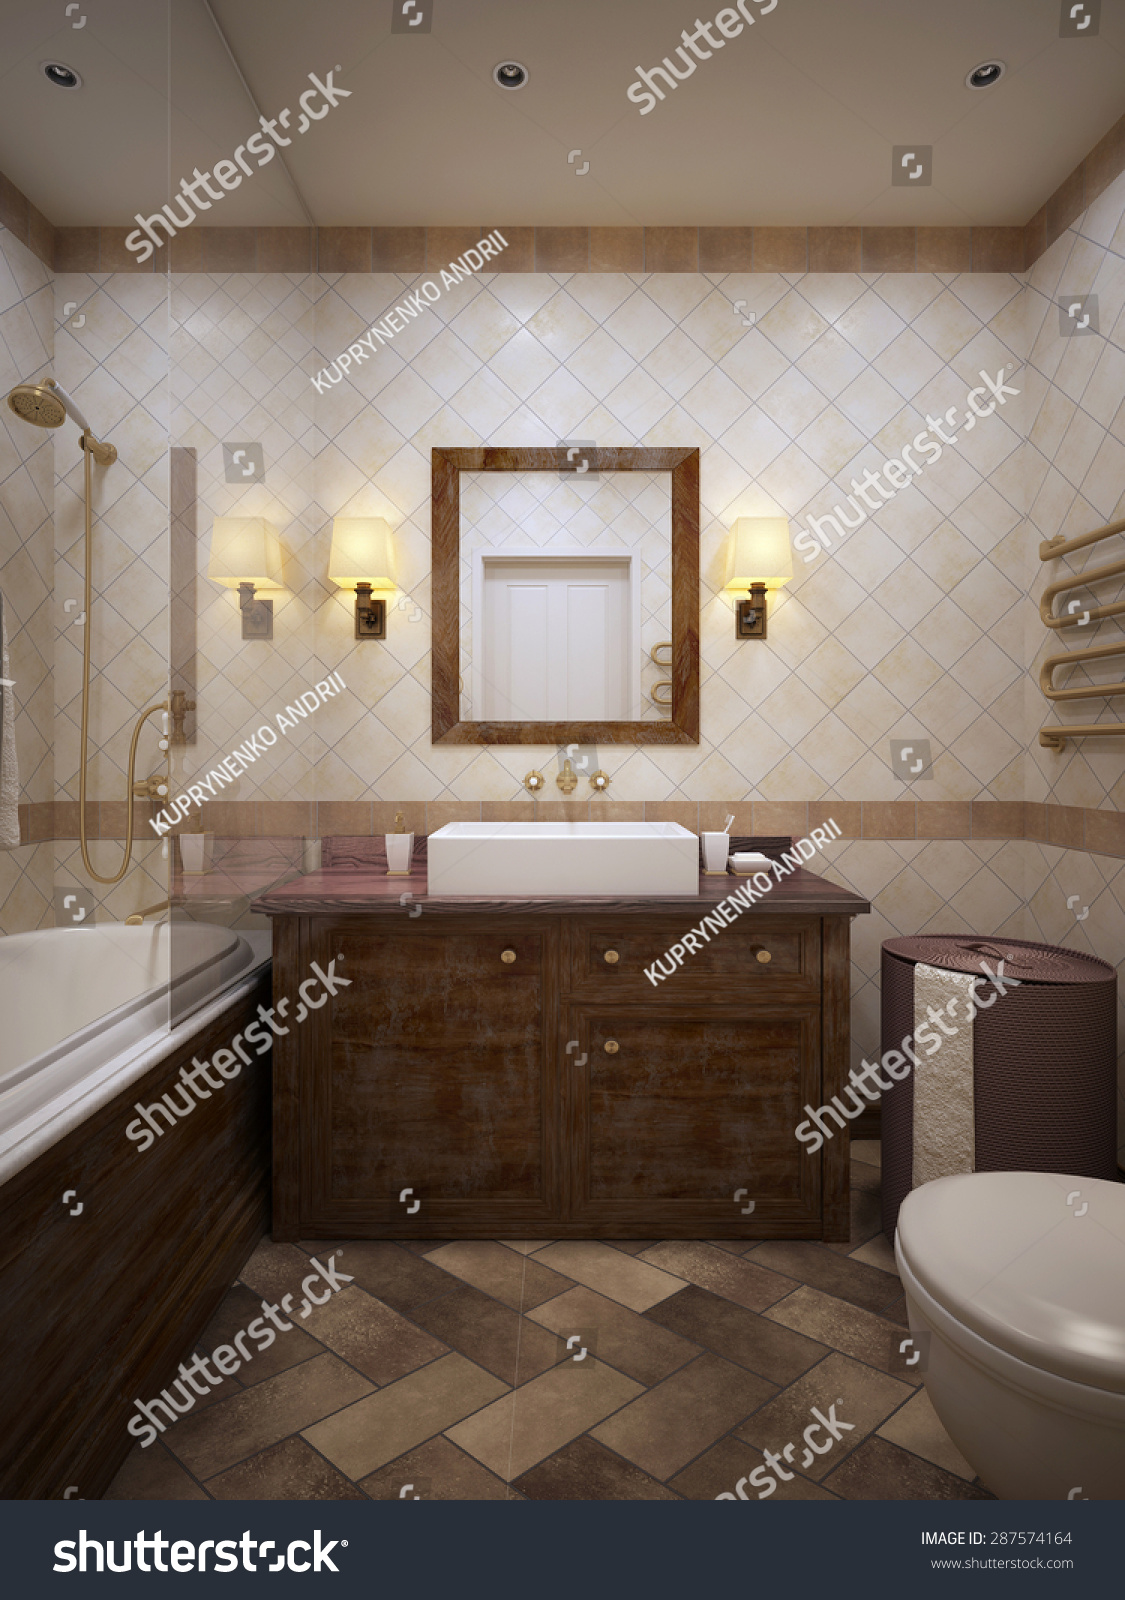 Classical Bathroom With Wood Furniture And Walls In Beige Tile. 3d ...